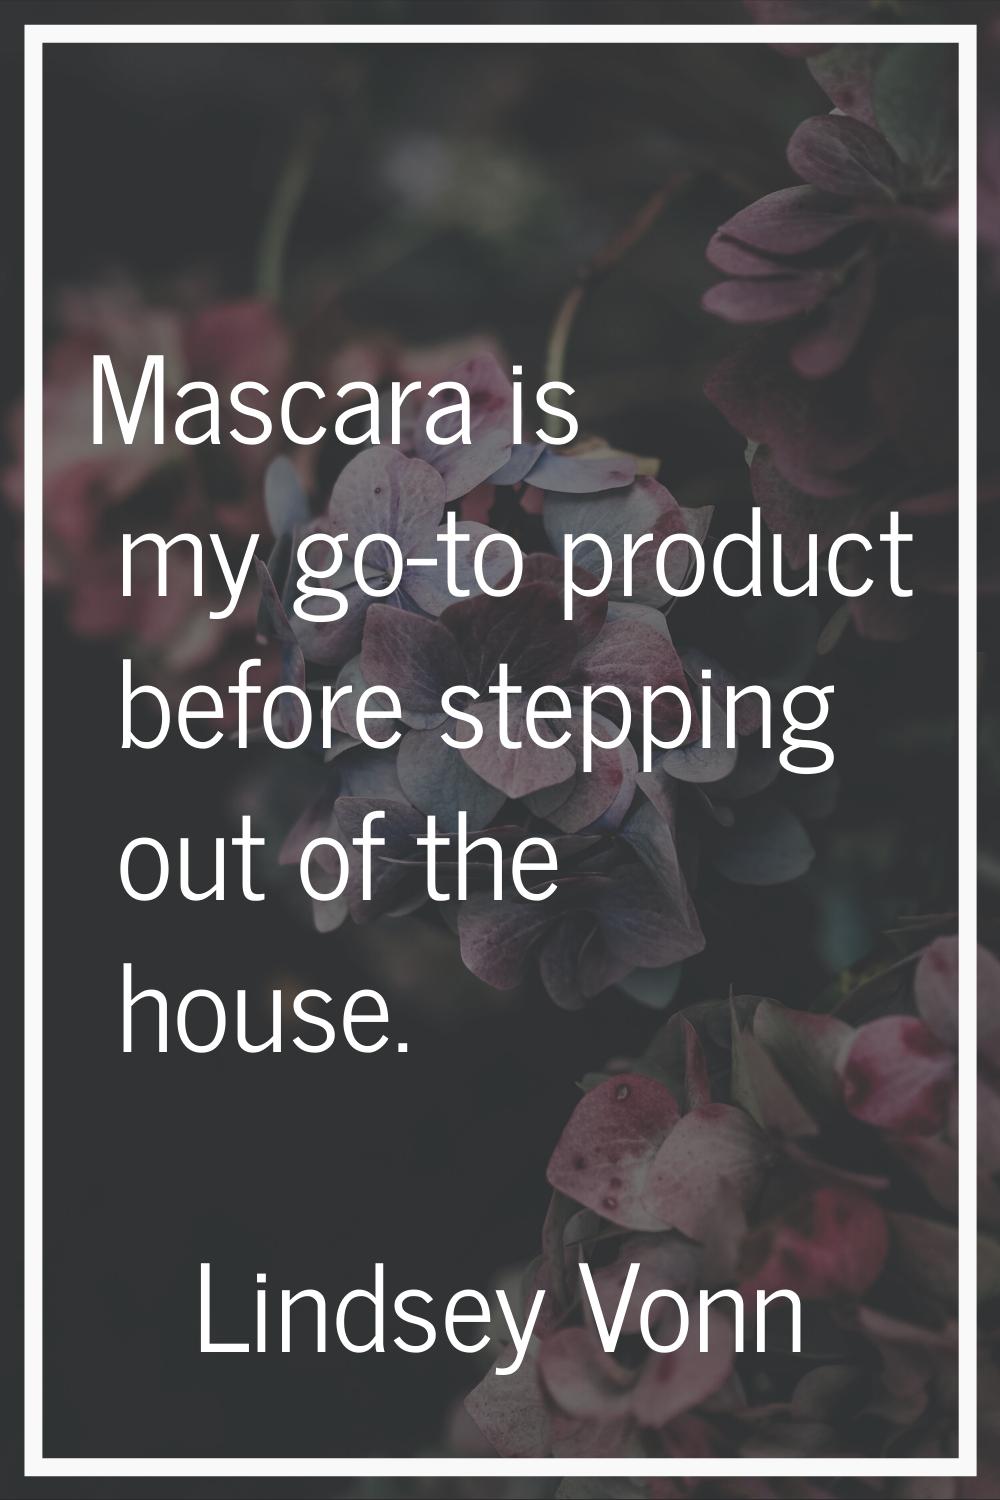 Mascara is my go-to product before stepping out of the house.